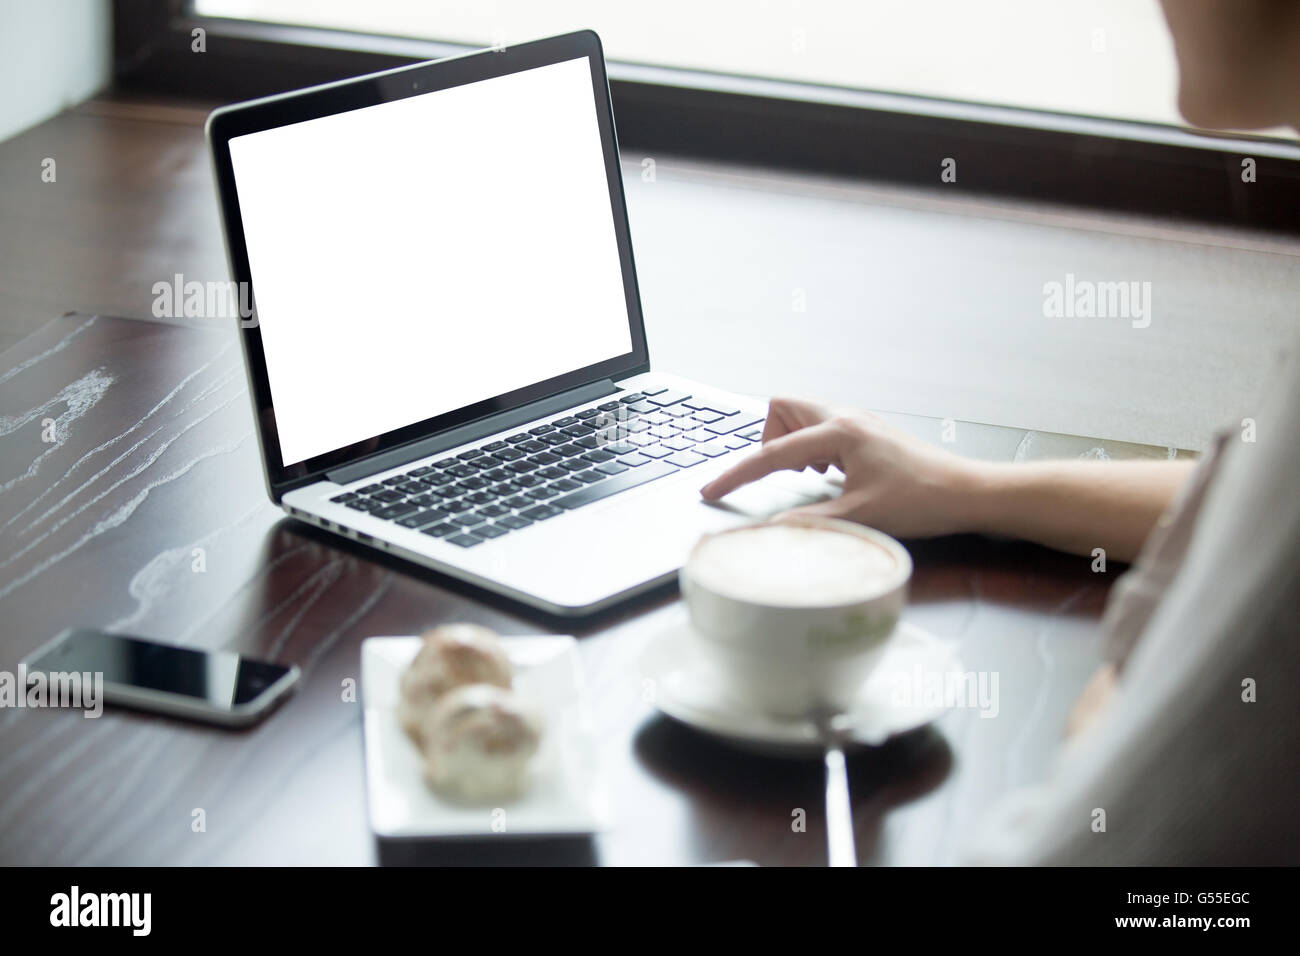 Female hands on laptop touch pad. Woman sitting with cup of coffee and cakes and surfing the internet. Attractive model Stock Photo